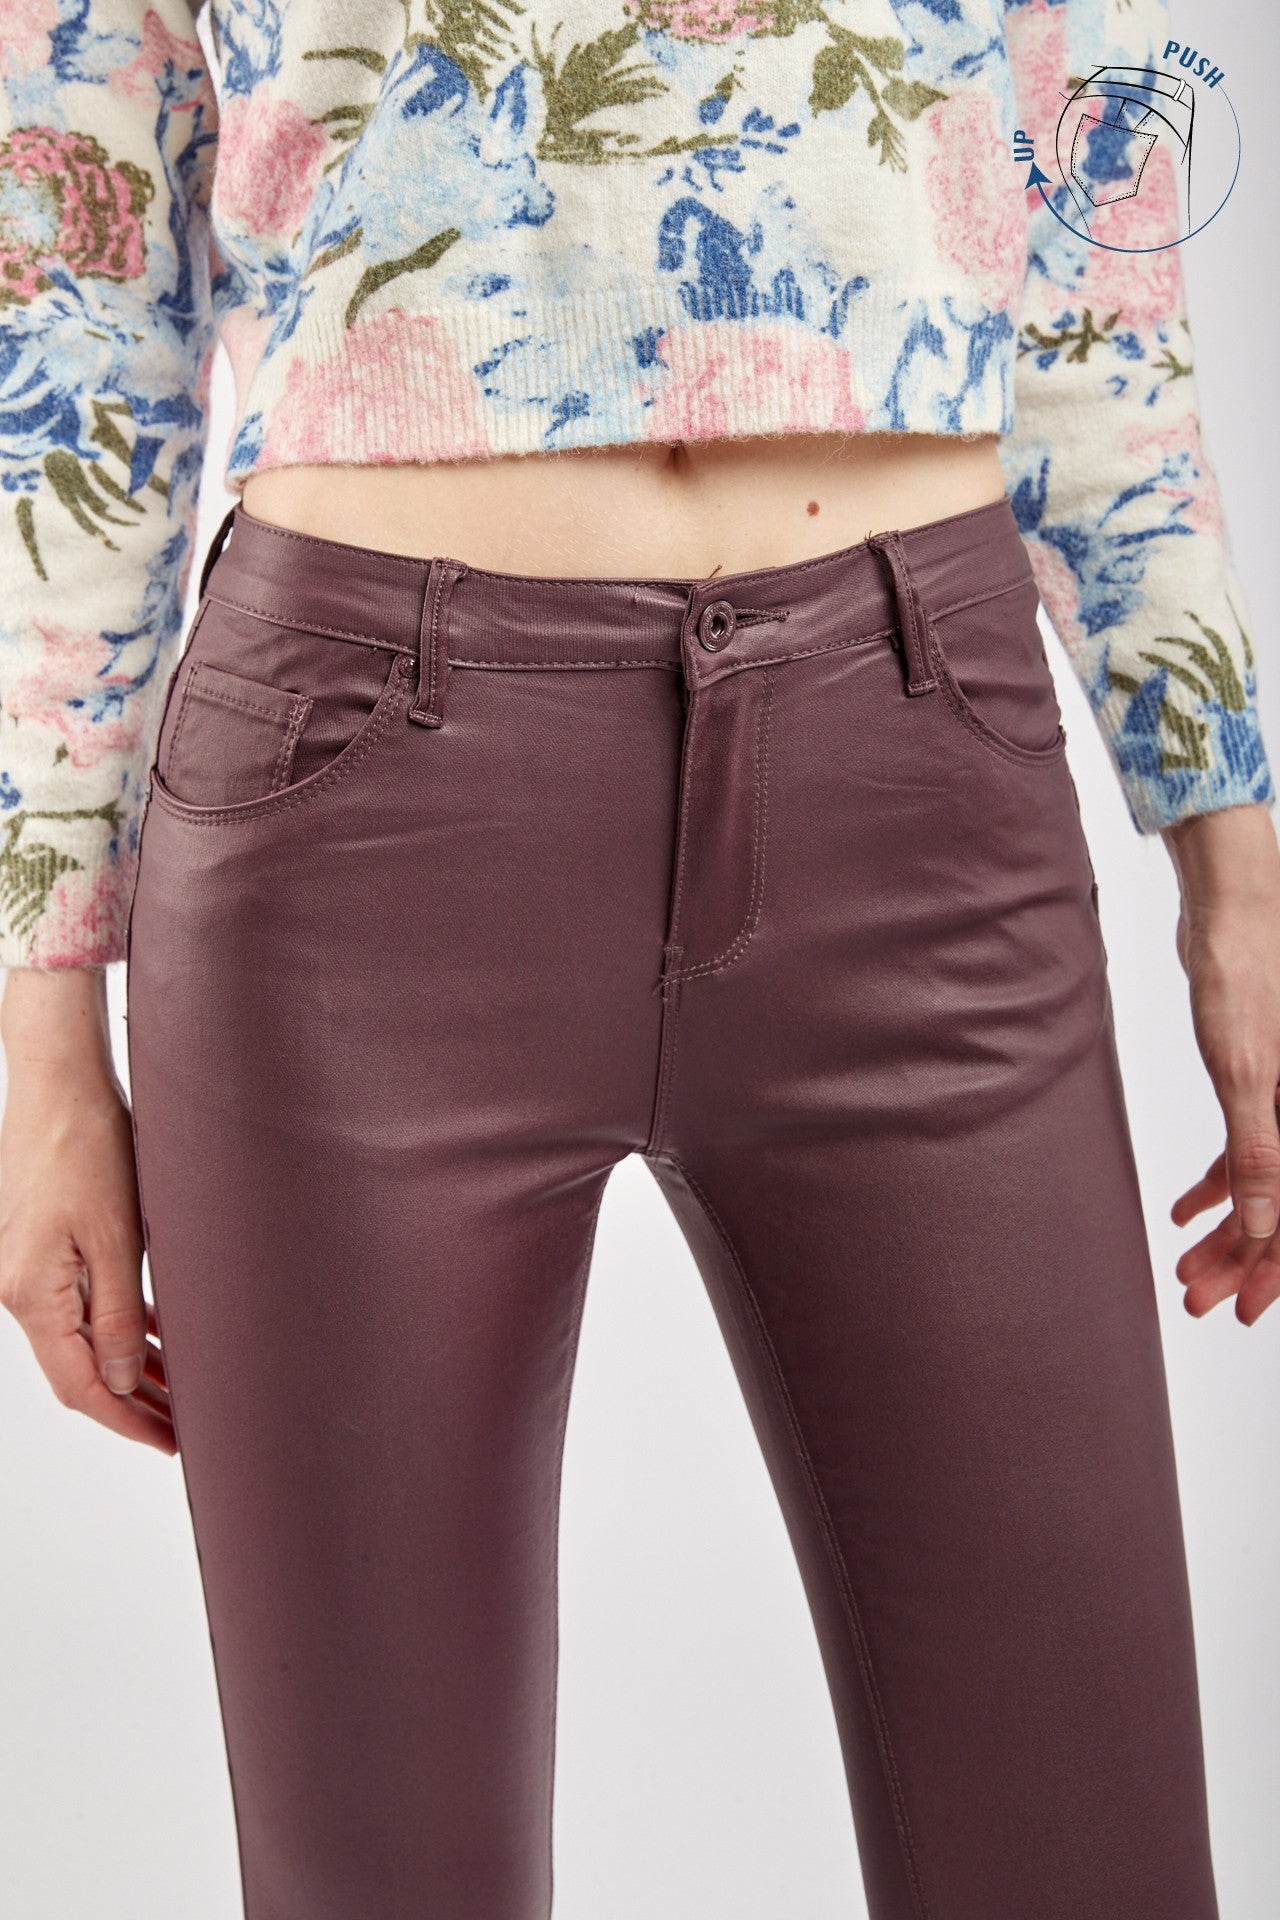 Push -Up coated pants - Kendall